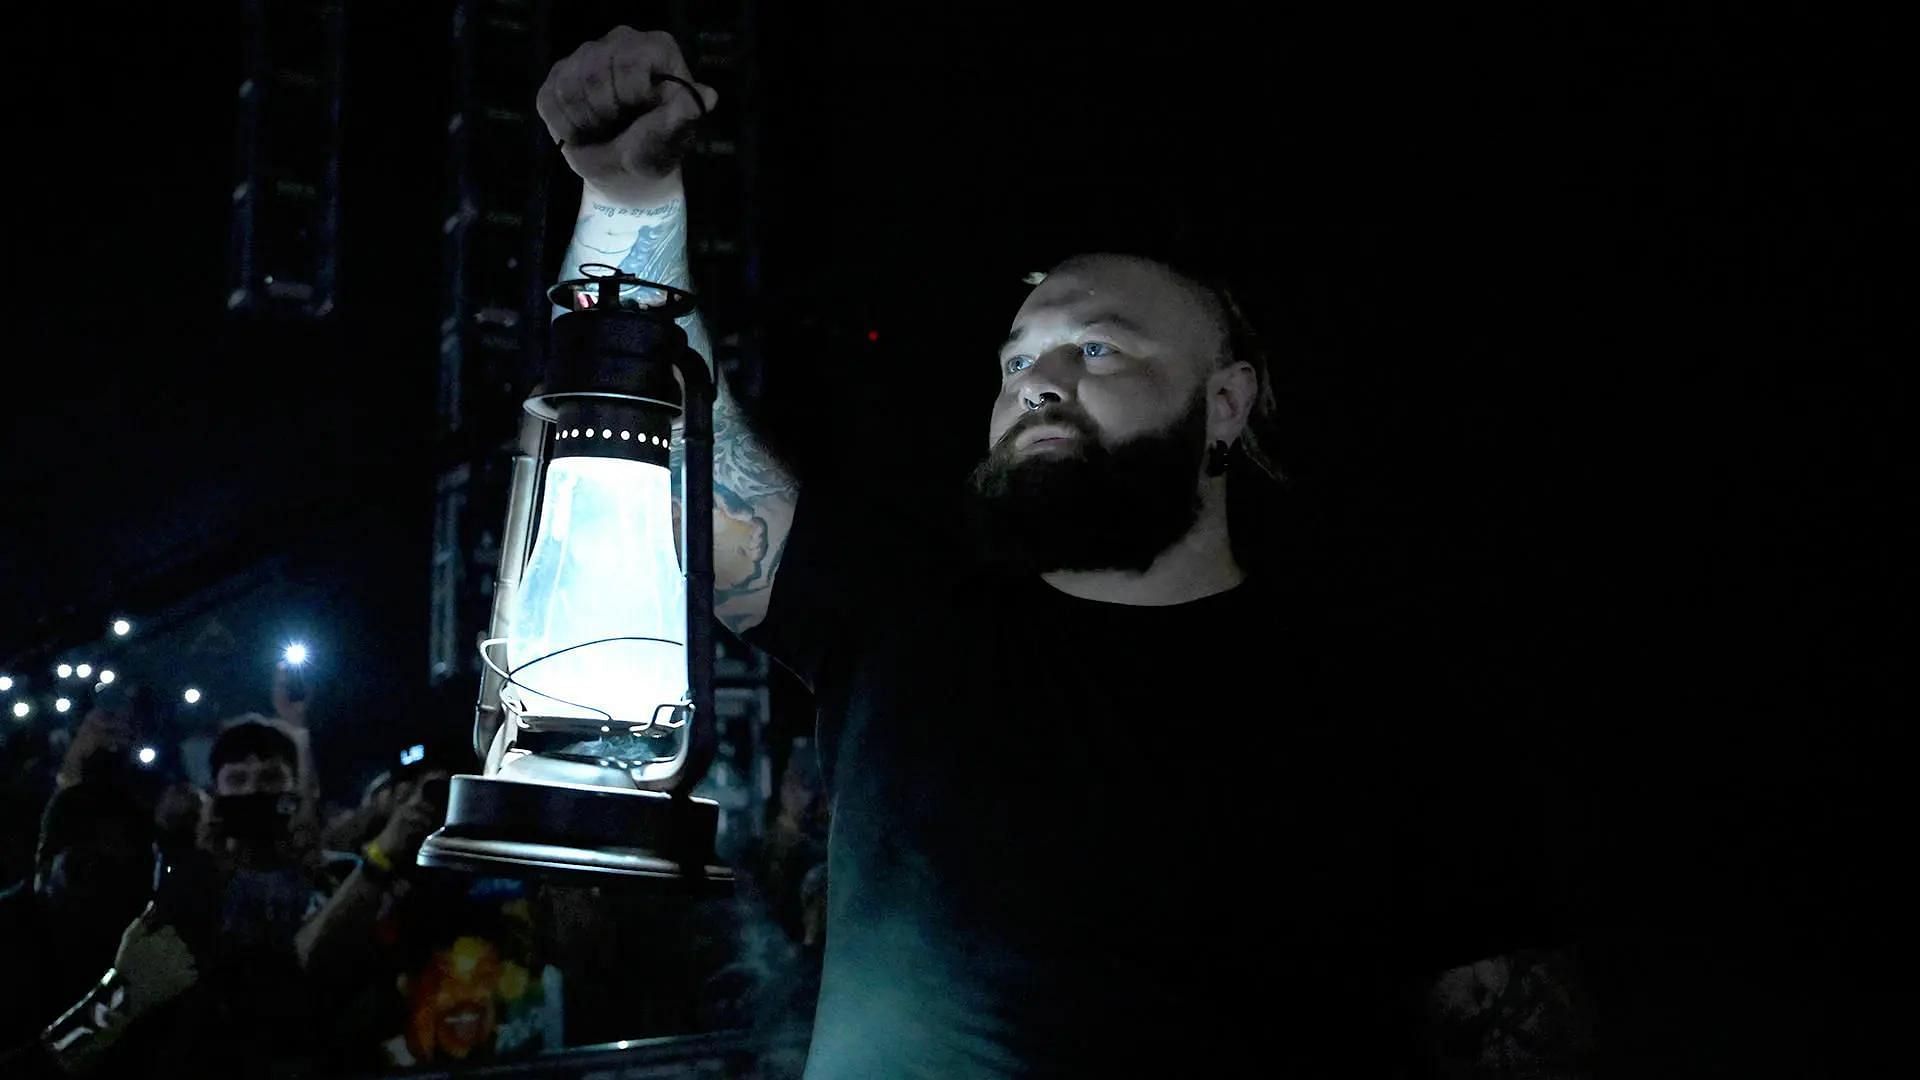 Bray Wyatt made his presence known on SmackDown